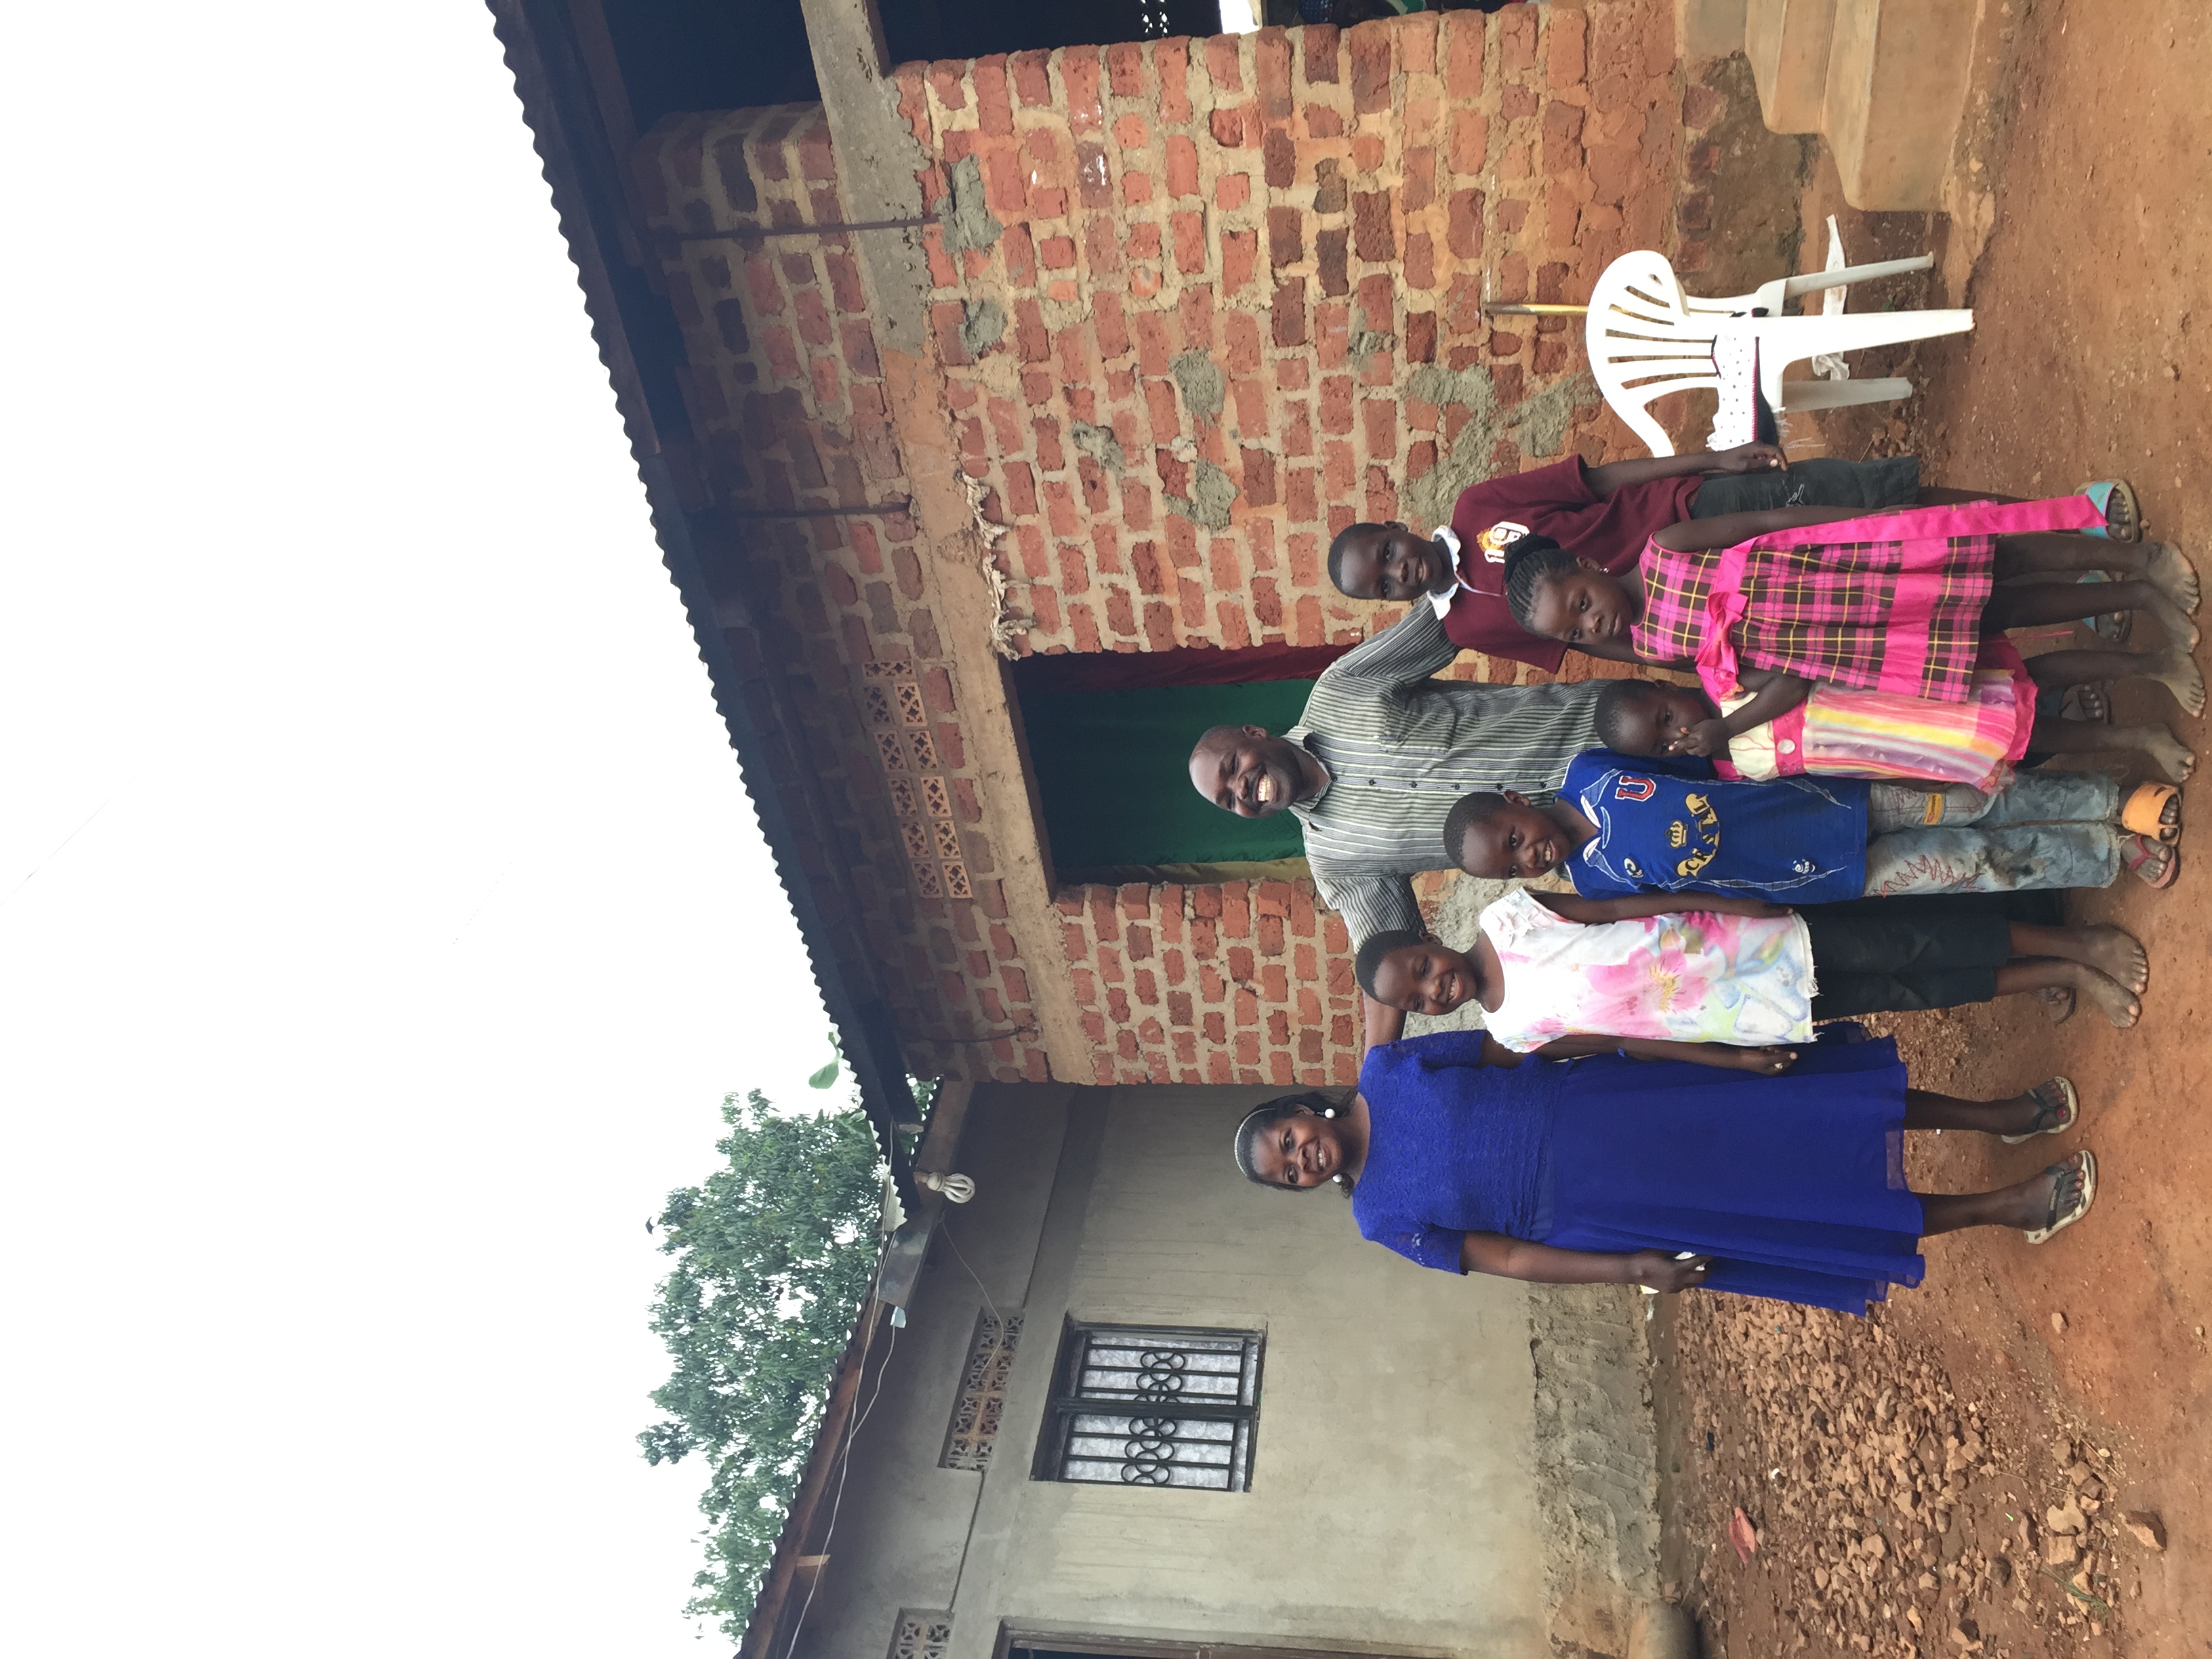  UGANDA: [Pastor Visit] Pastor Ivan Wanda chooses to live in a poor village outside &nbsp;Kampala next door the church and alongside congregants. He believes it's important to be with the people he's serving citing the humility and descending of Chri